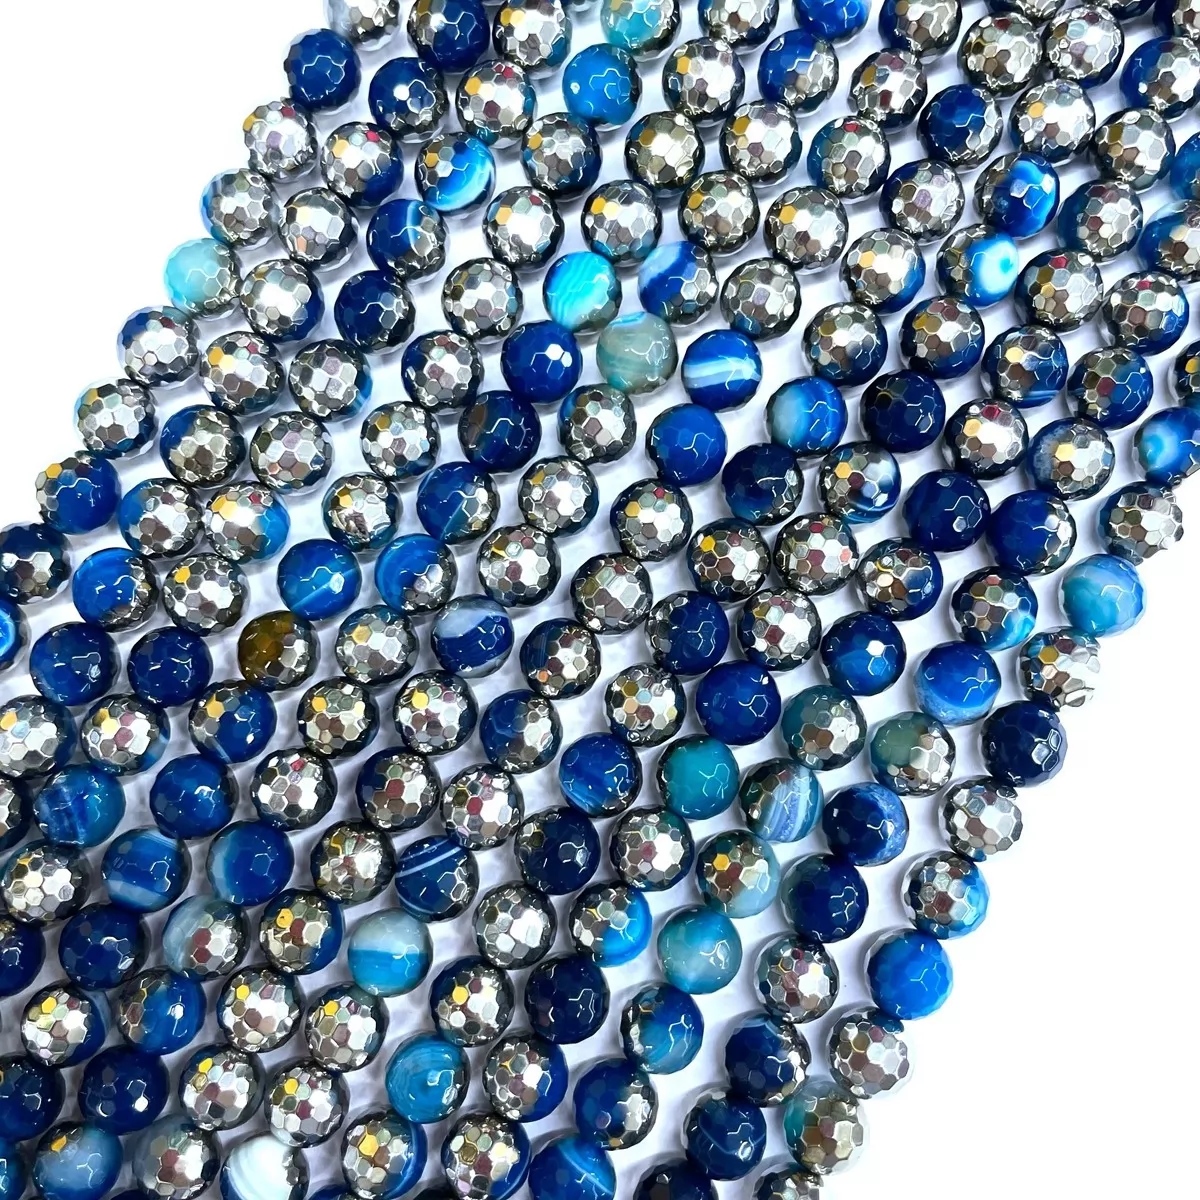 Blue Agate With Silver Coating, Faceted Round, Approx 6mm-12mm, Approx 380mm